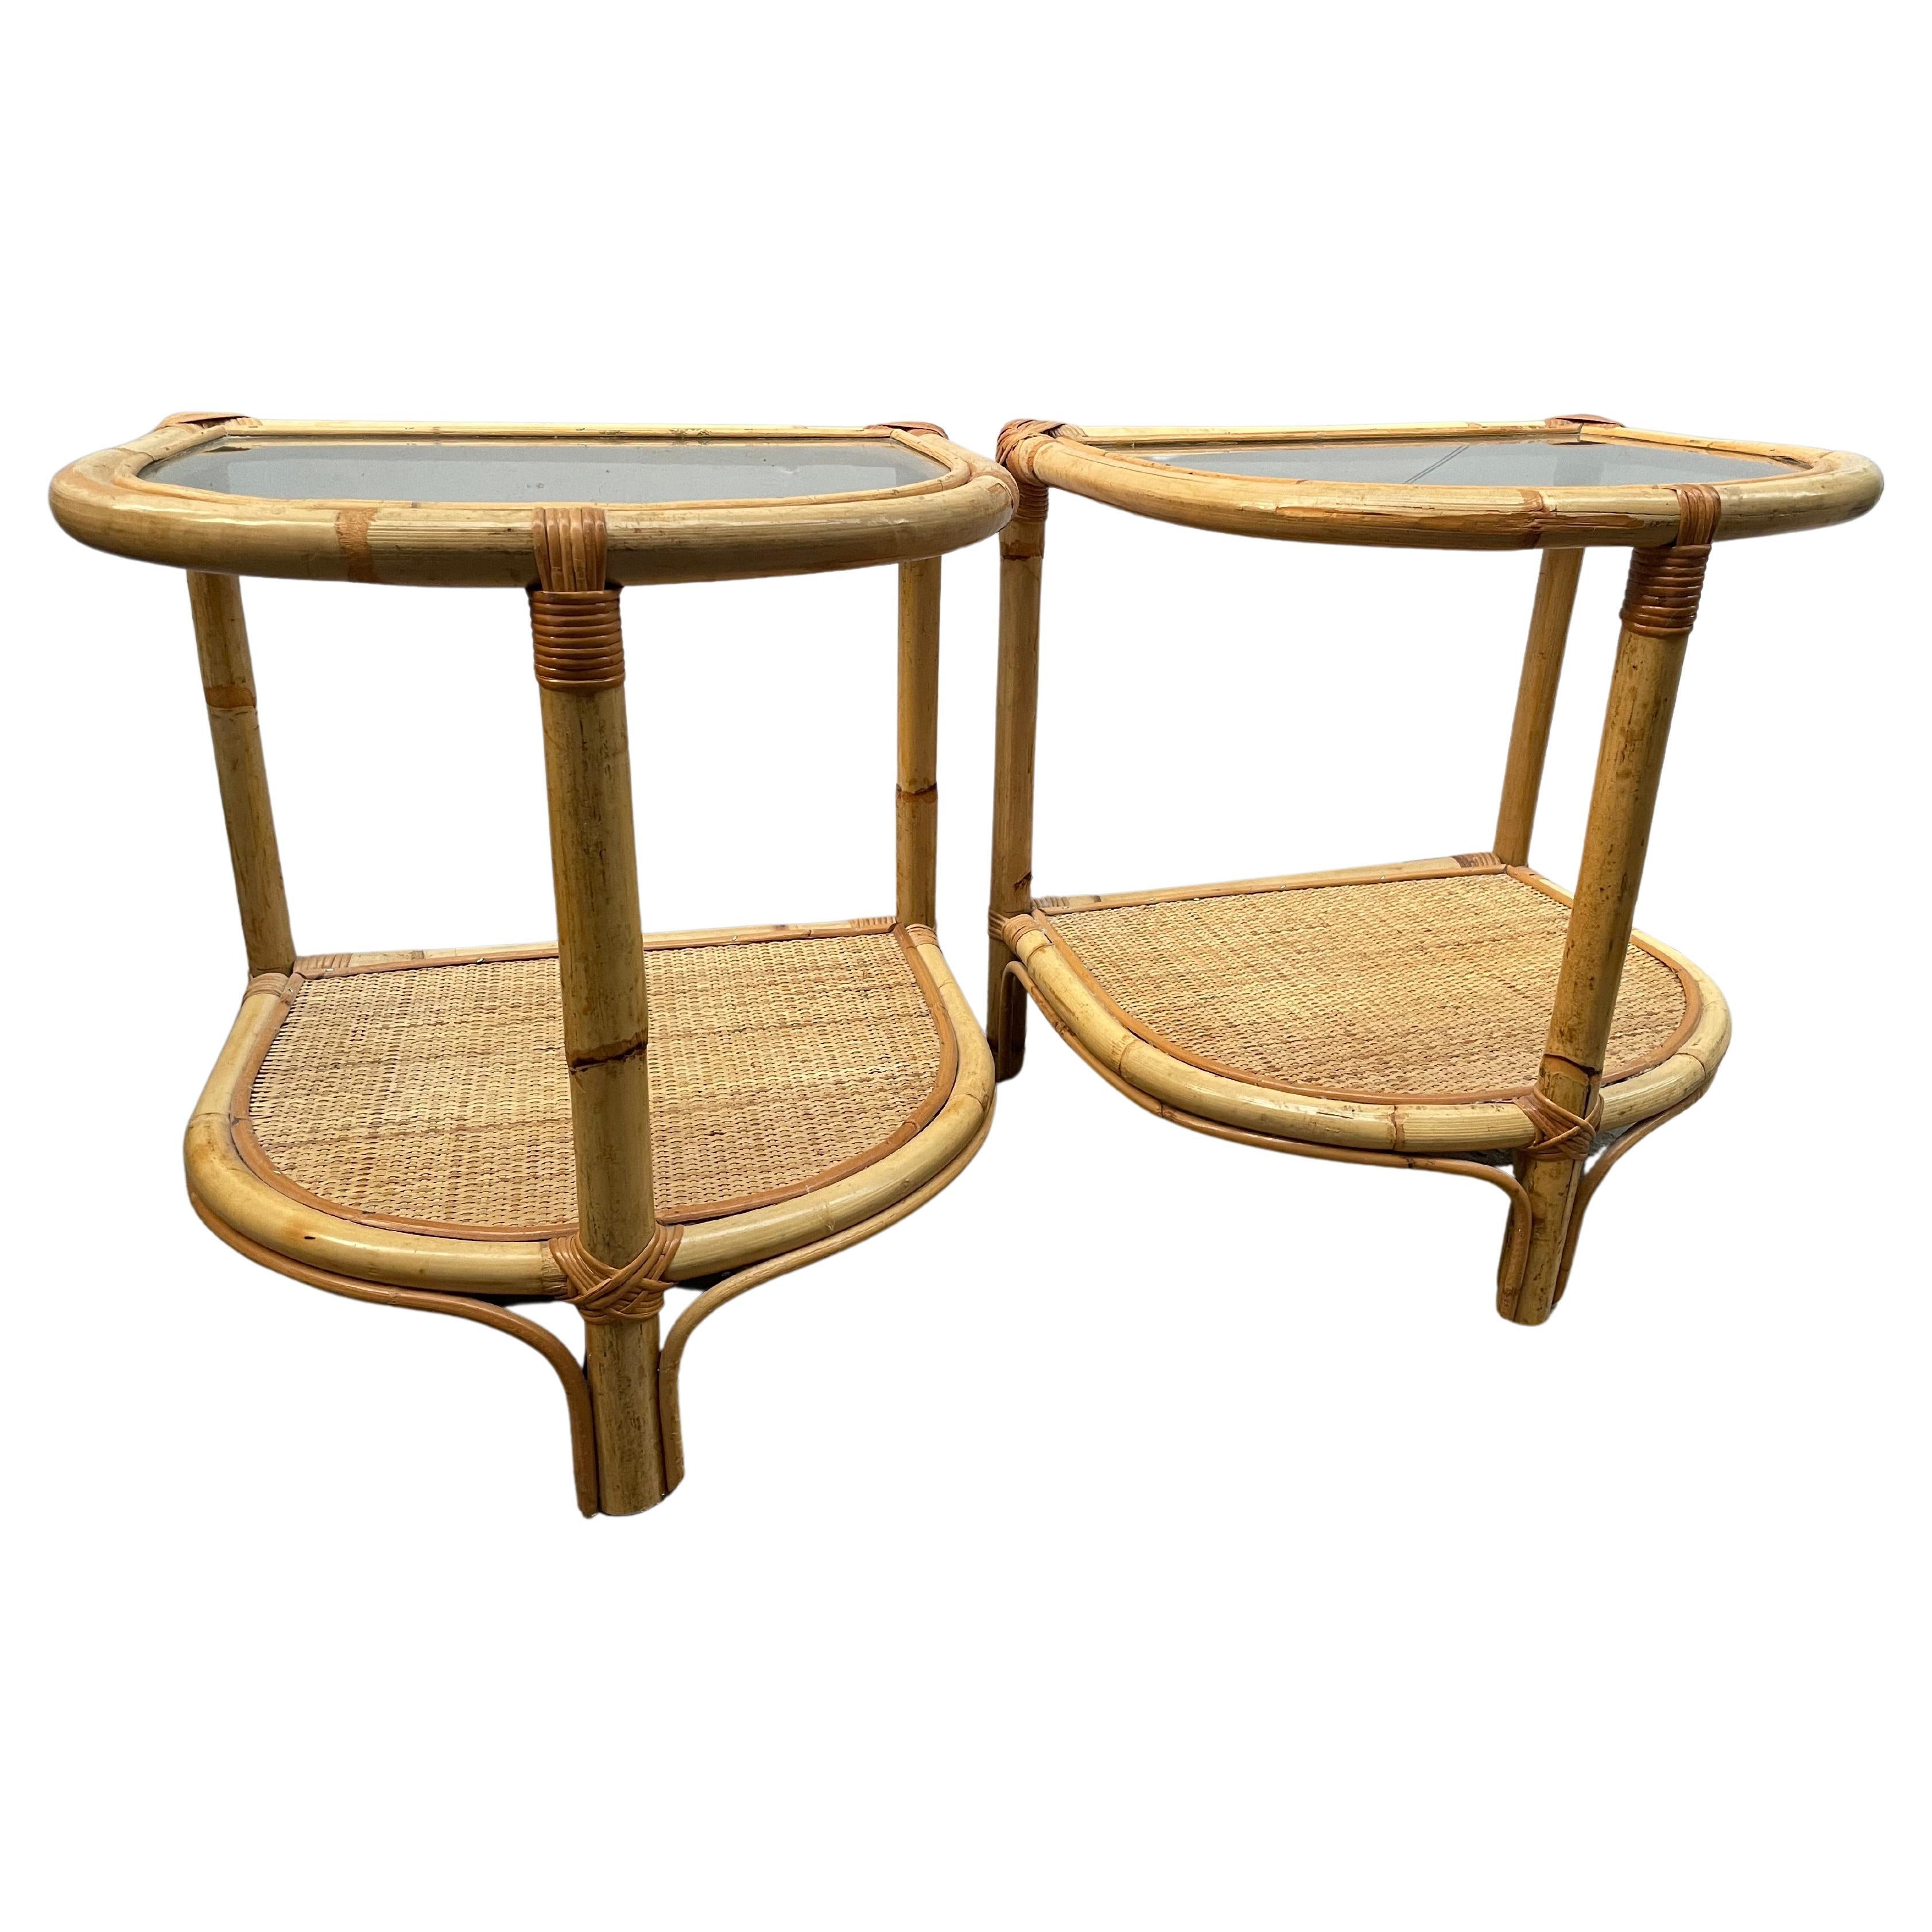 Vintage bamboo rattan nightstands, crafted in Denmark during the 1970s For Sale